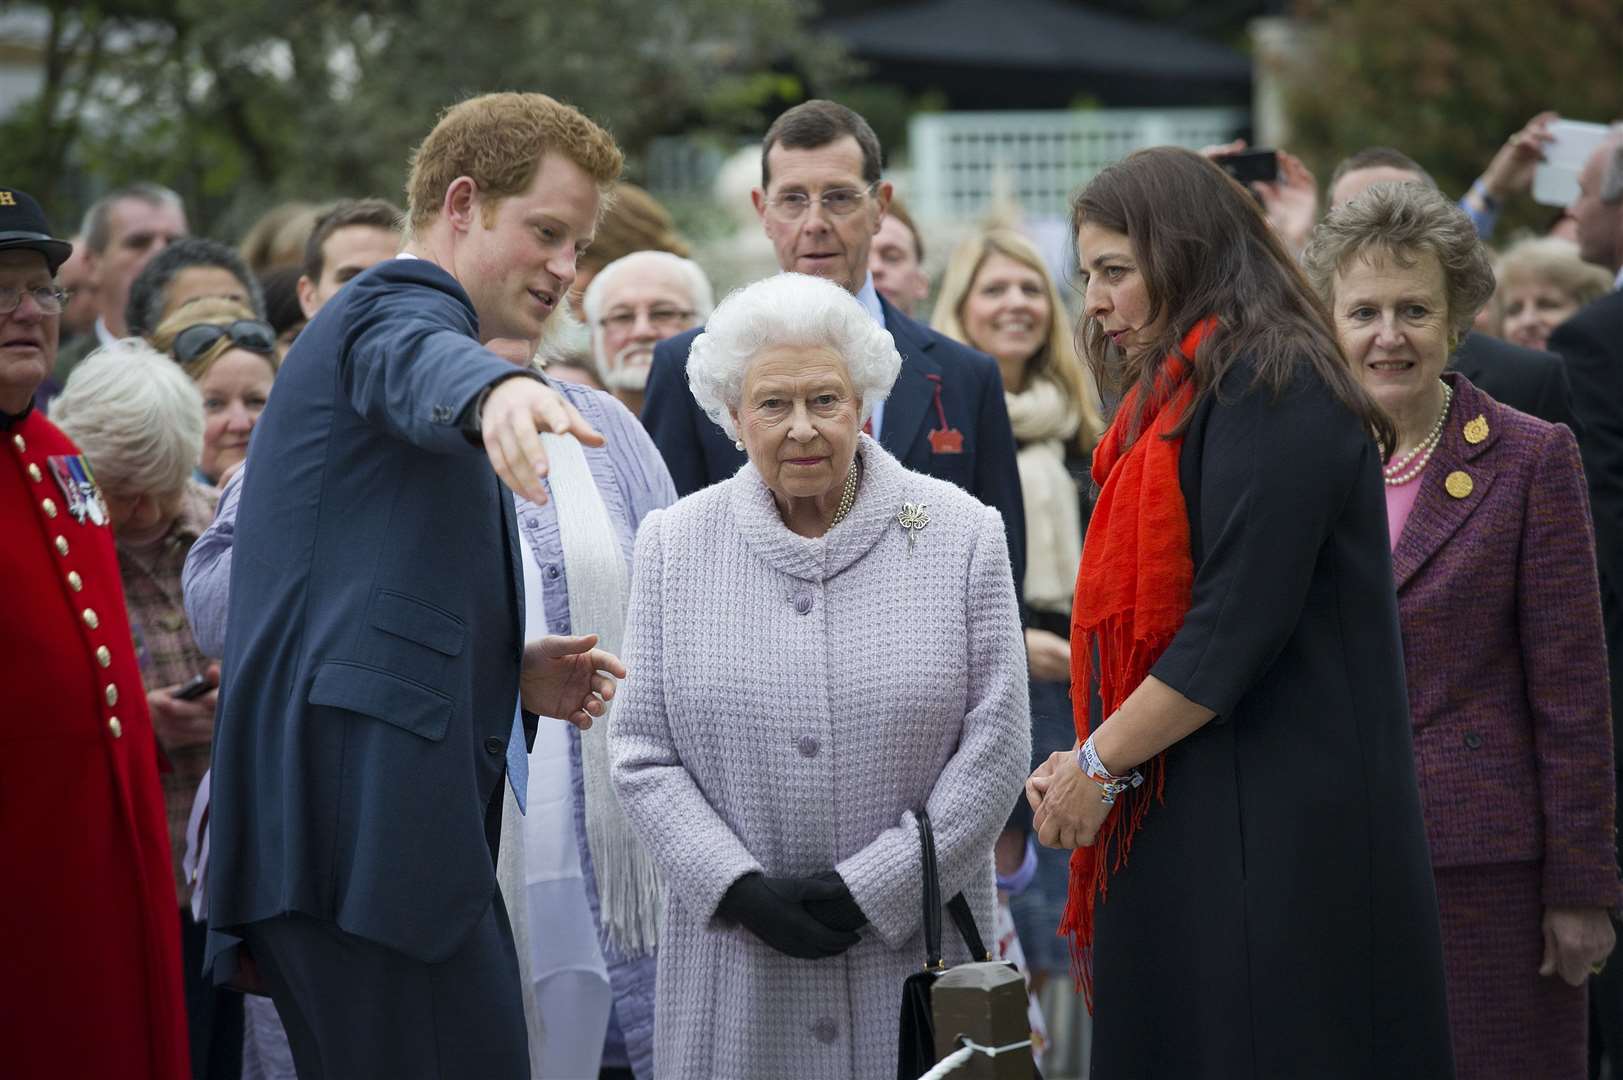 Harry gives his grandmother the Queen a tour of his Sentebale garden at the Chelsea Flower Show in 2013 (Geoff Pugh/PA)